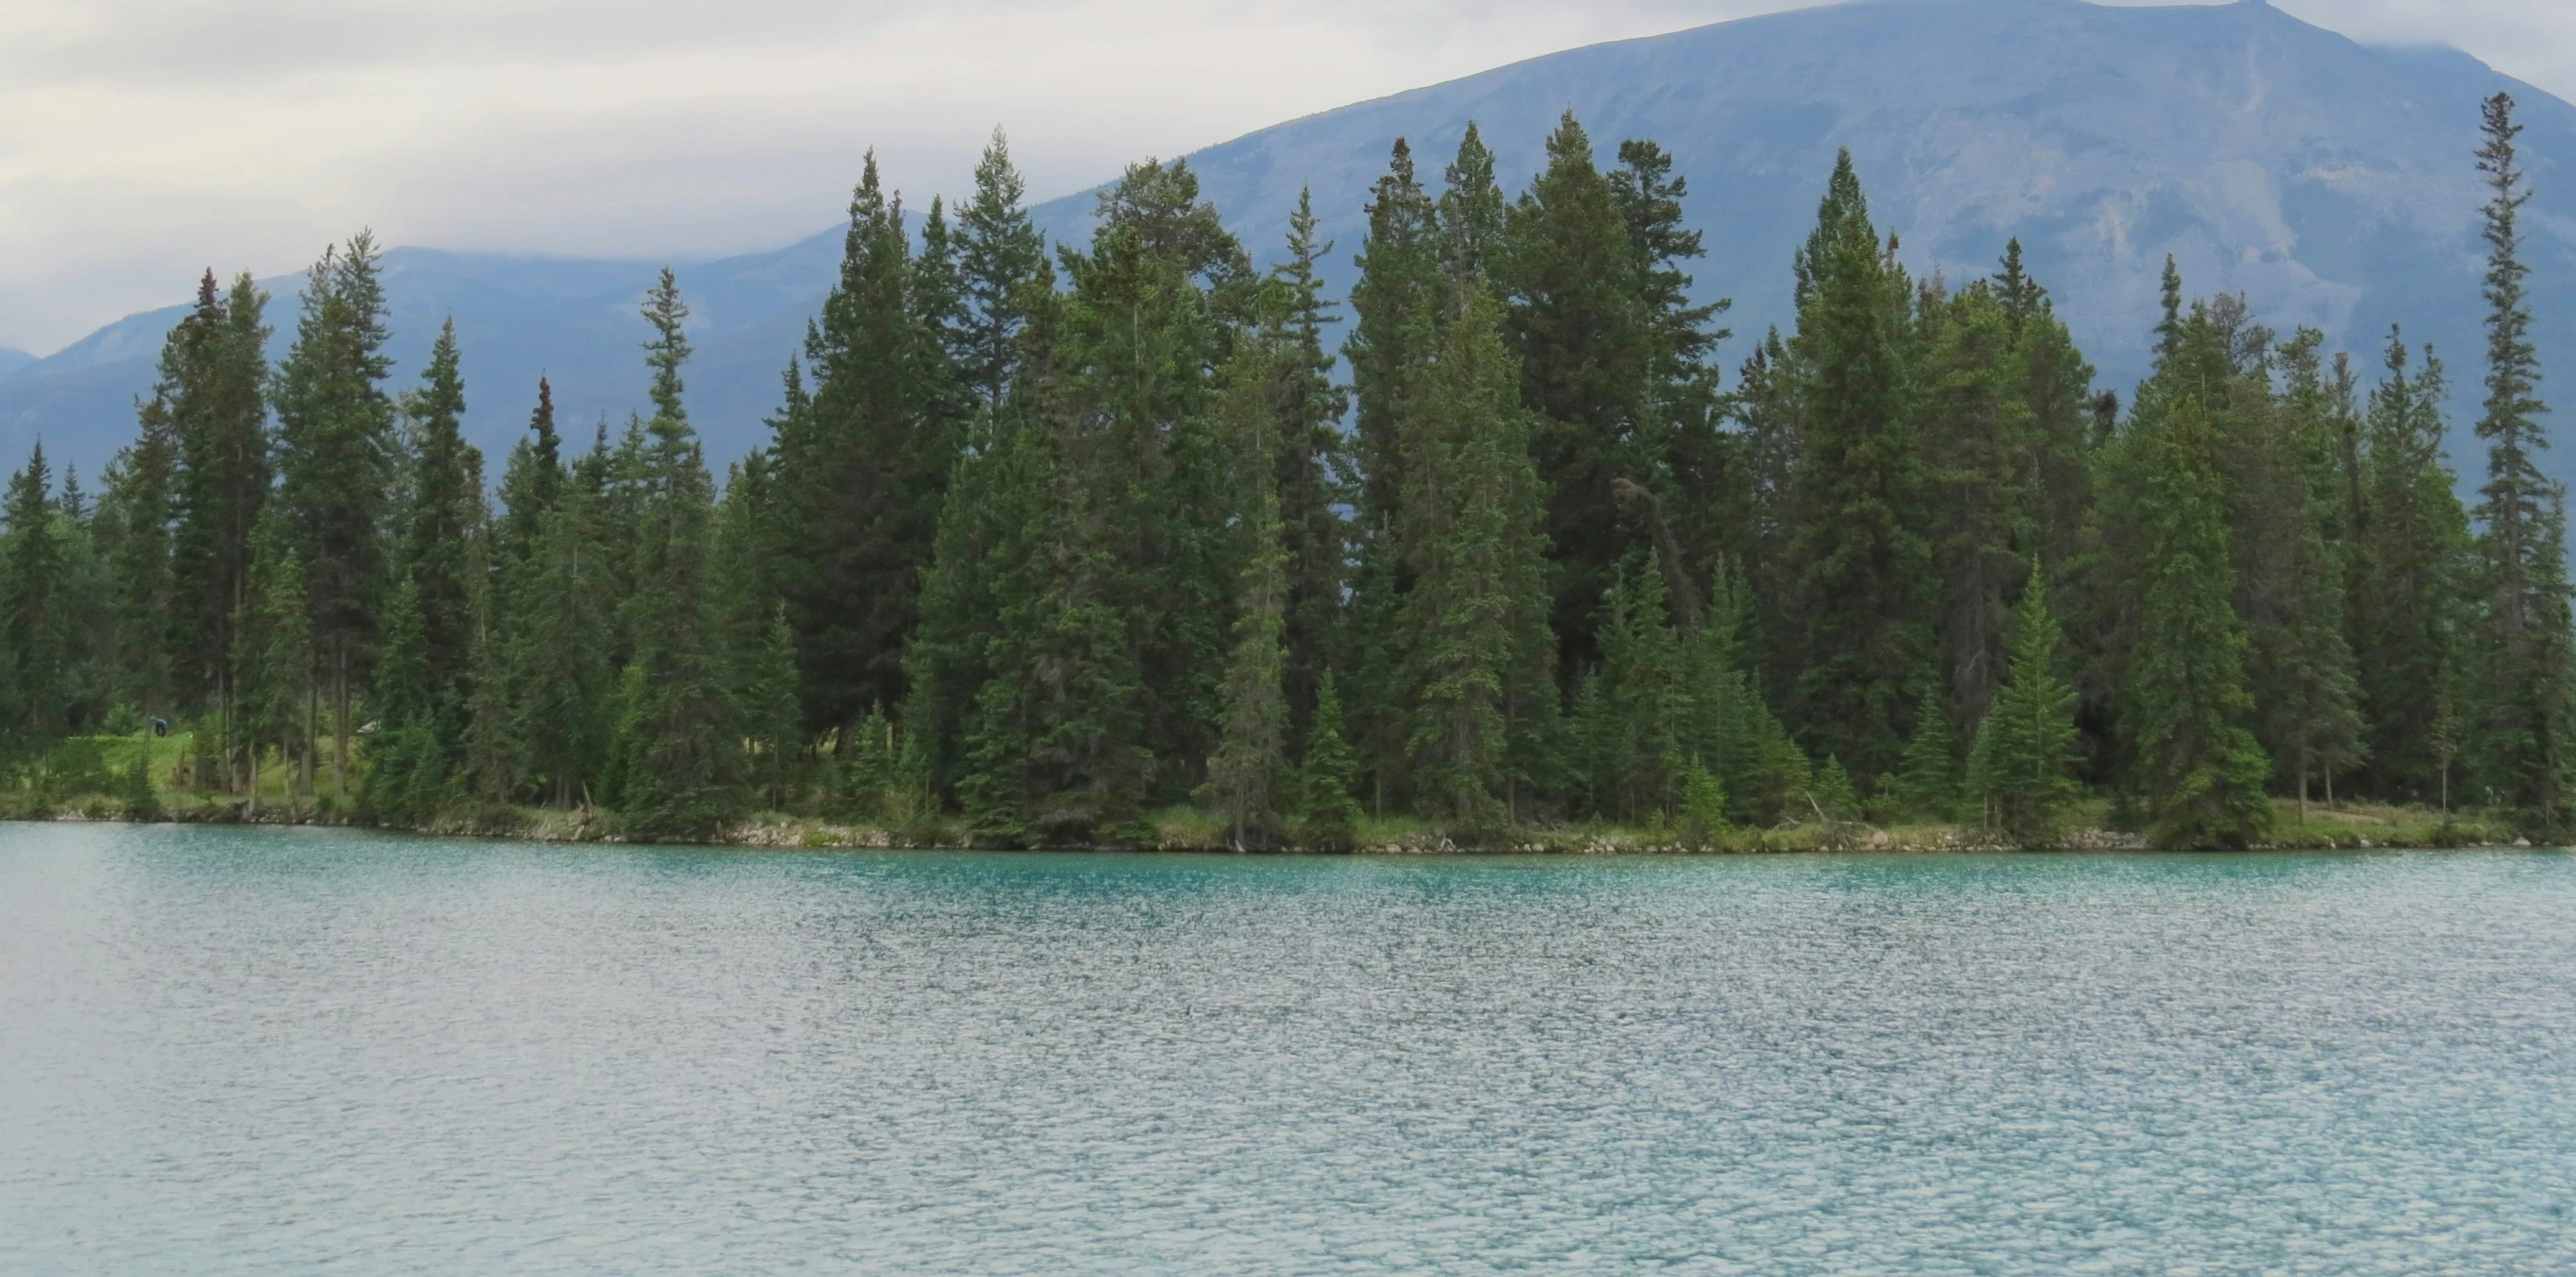 the view of trees and the mountains from the water